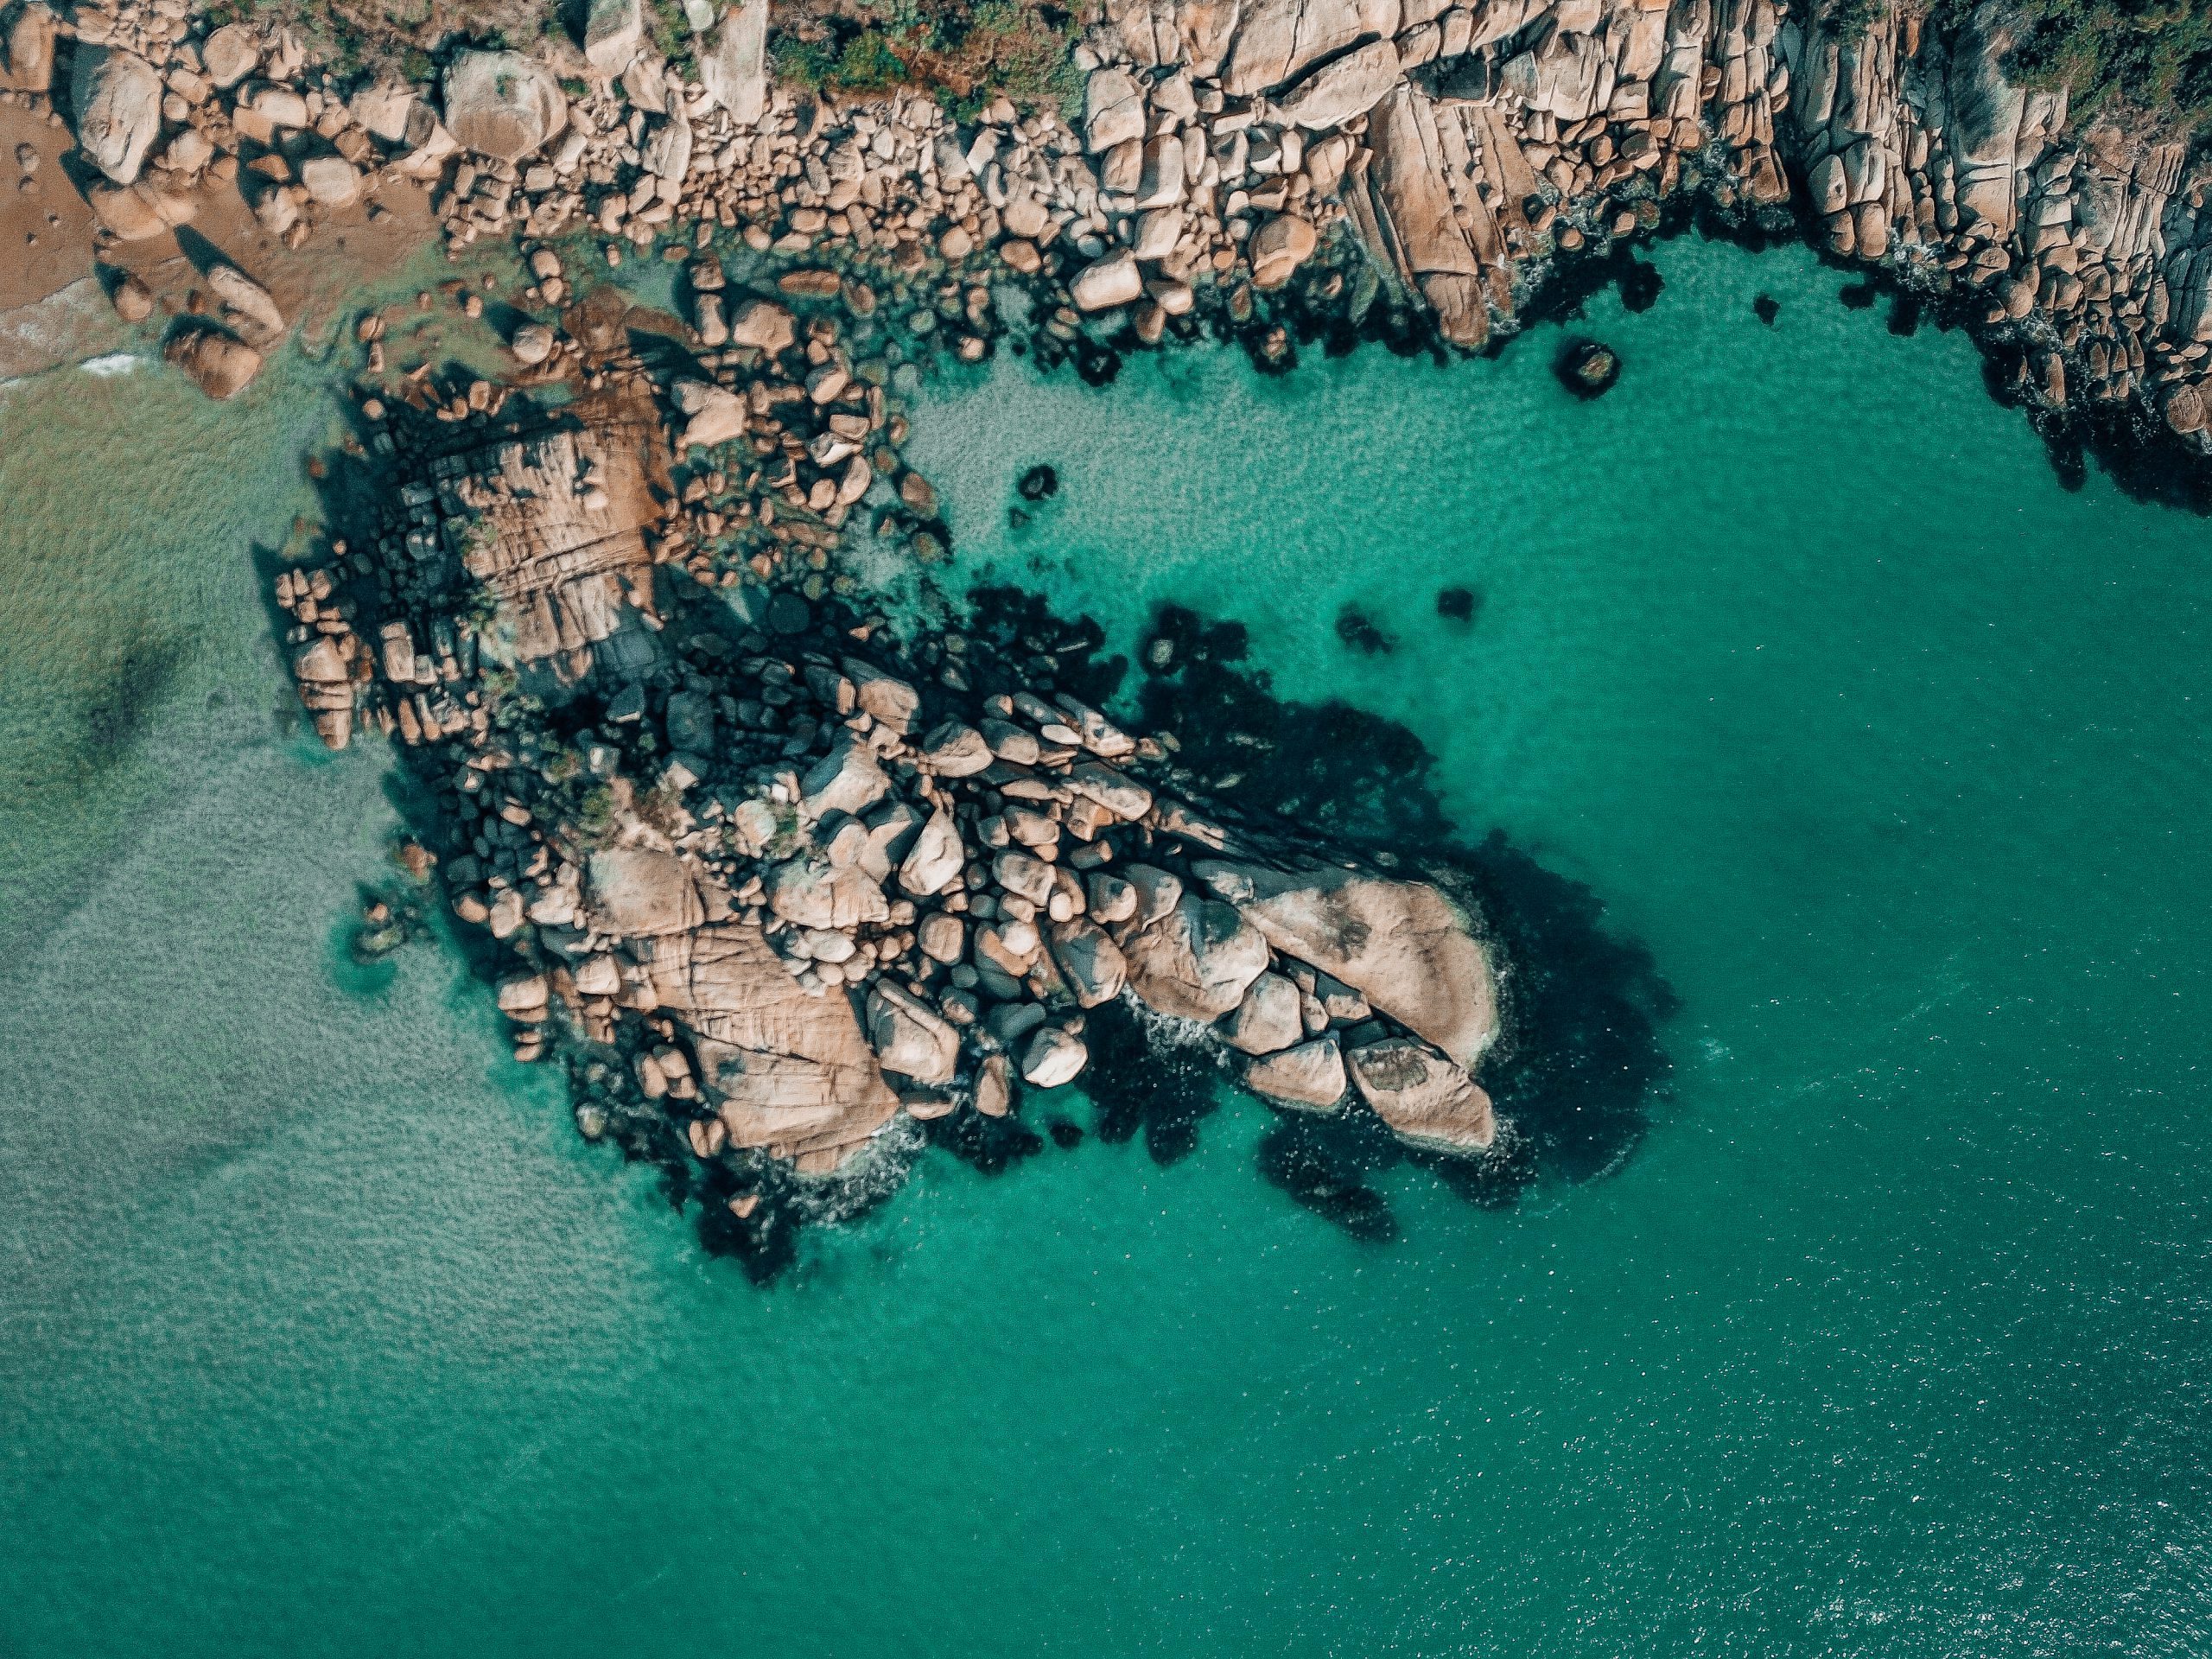 An aerial view of a rocky cove with grey rocks dotted in the clear blue turquoise ocean.